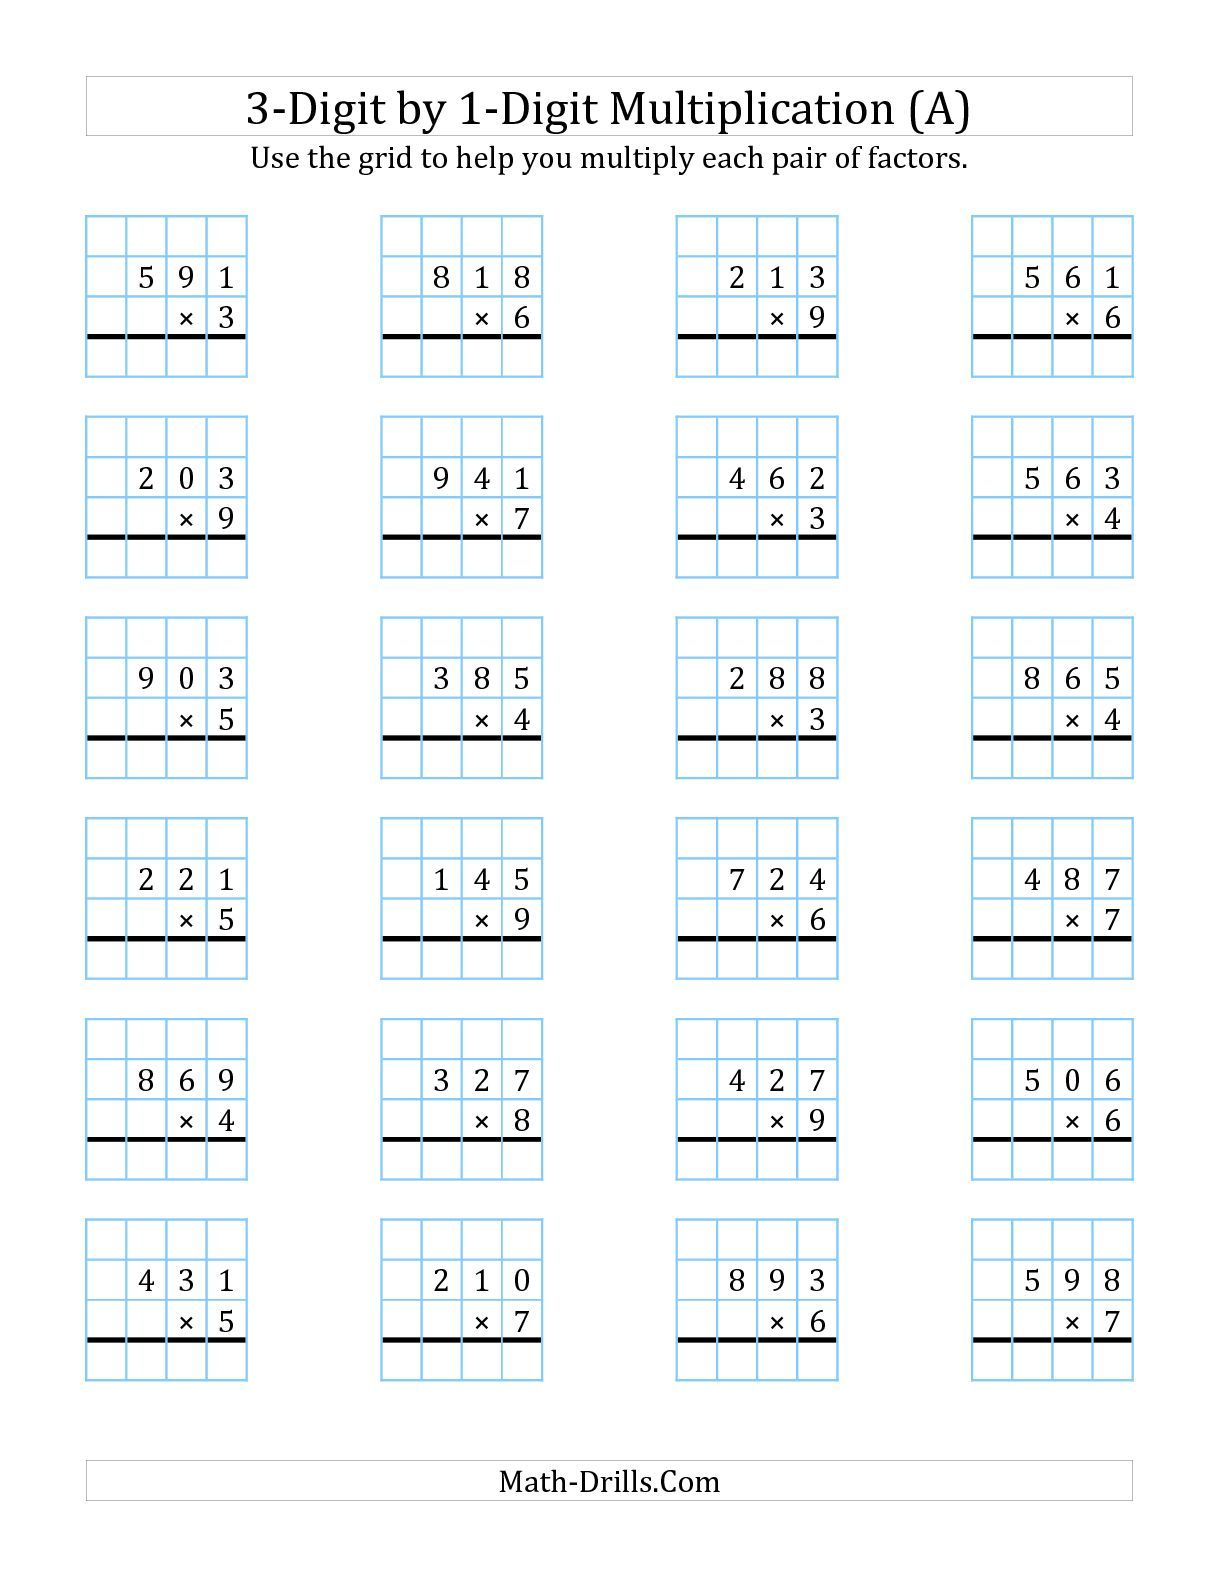 The 3-Digit1-Digit Multiplication With Grid Support (A pertaining to Multiplication Worksheets 3 Digit By 1 Digit